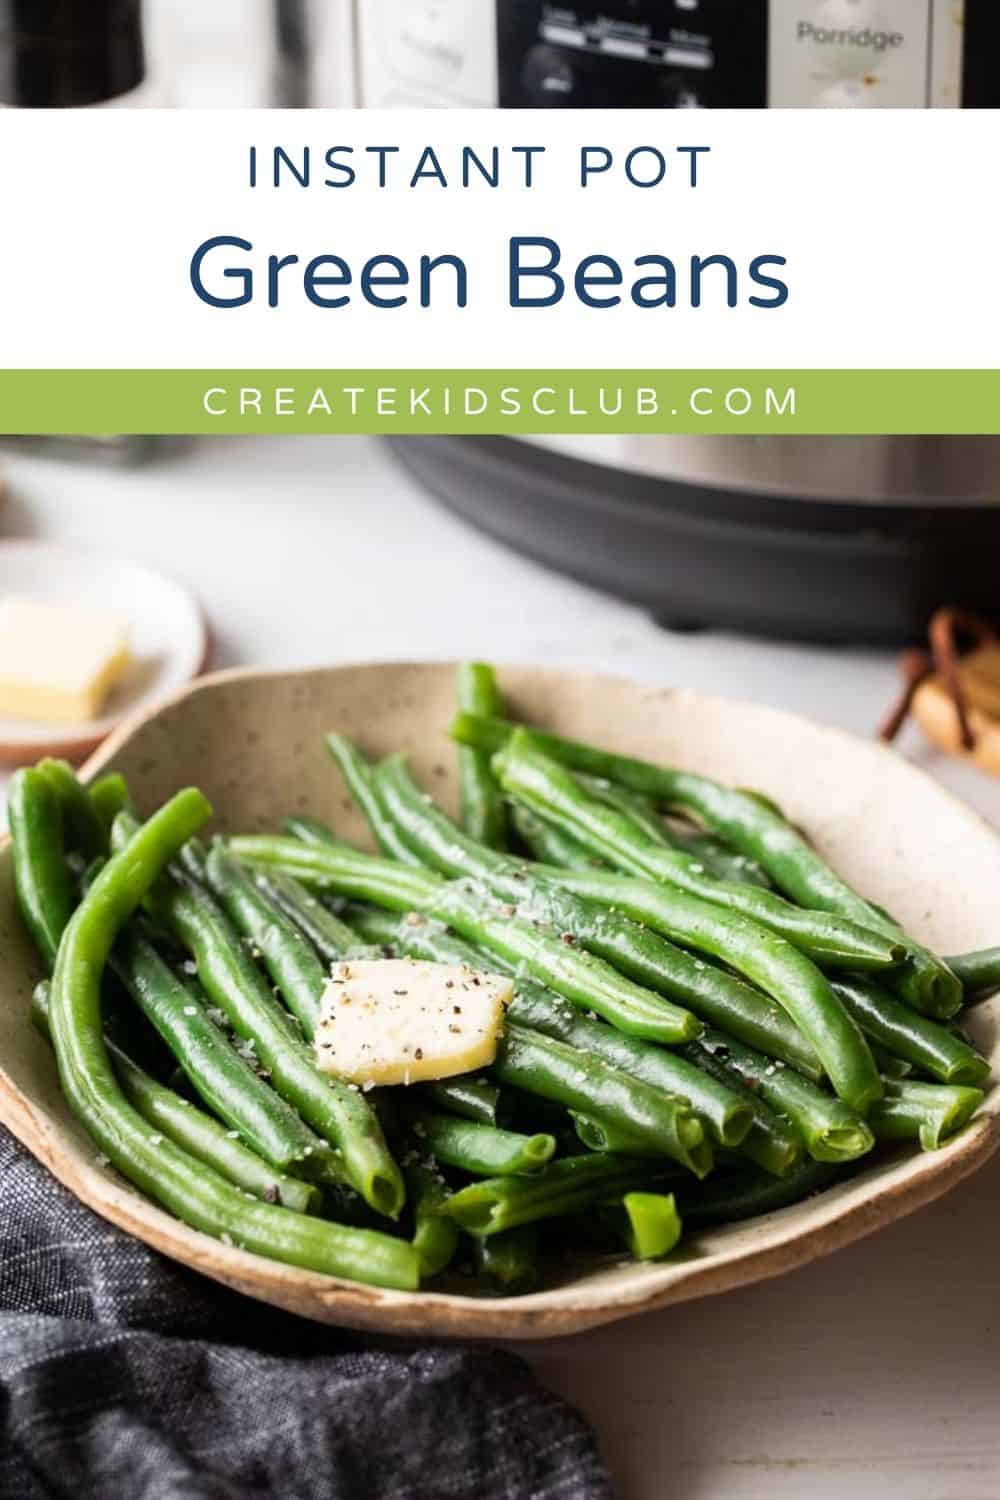 Pin of instant pot green beans shown in a bowl.